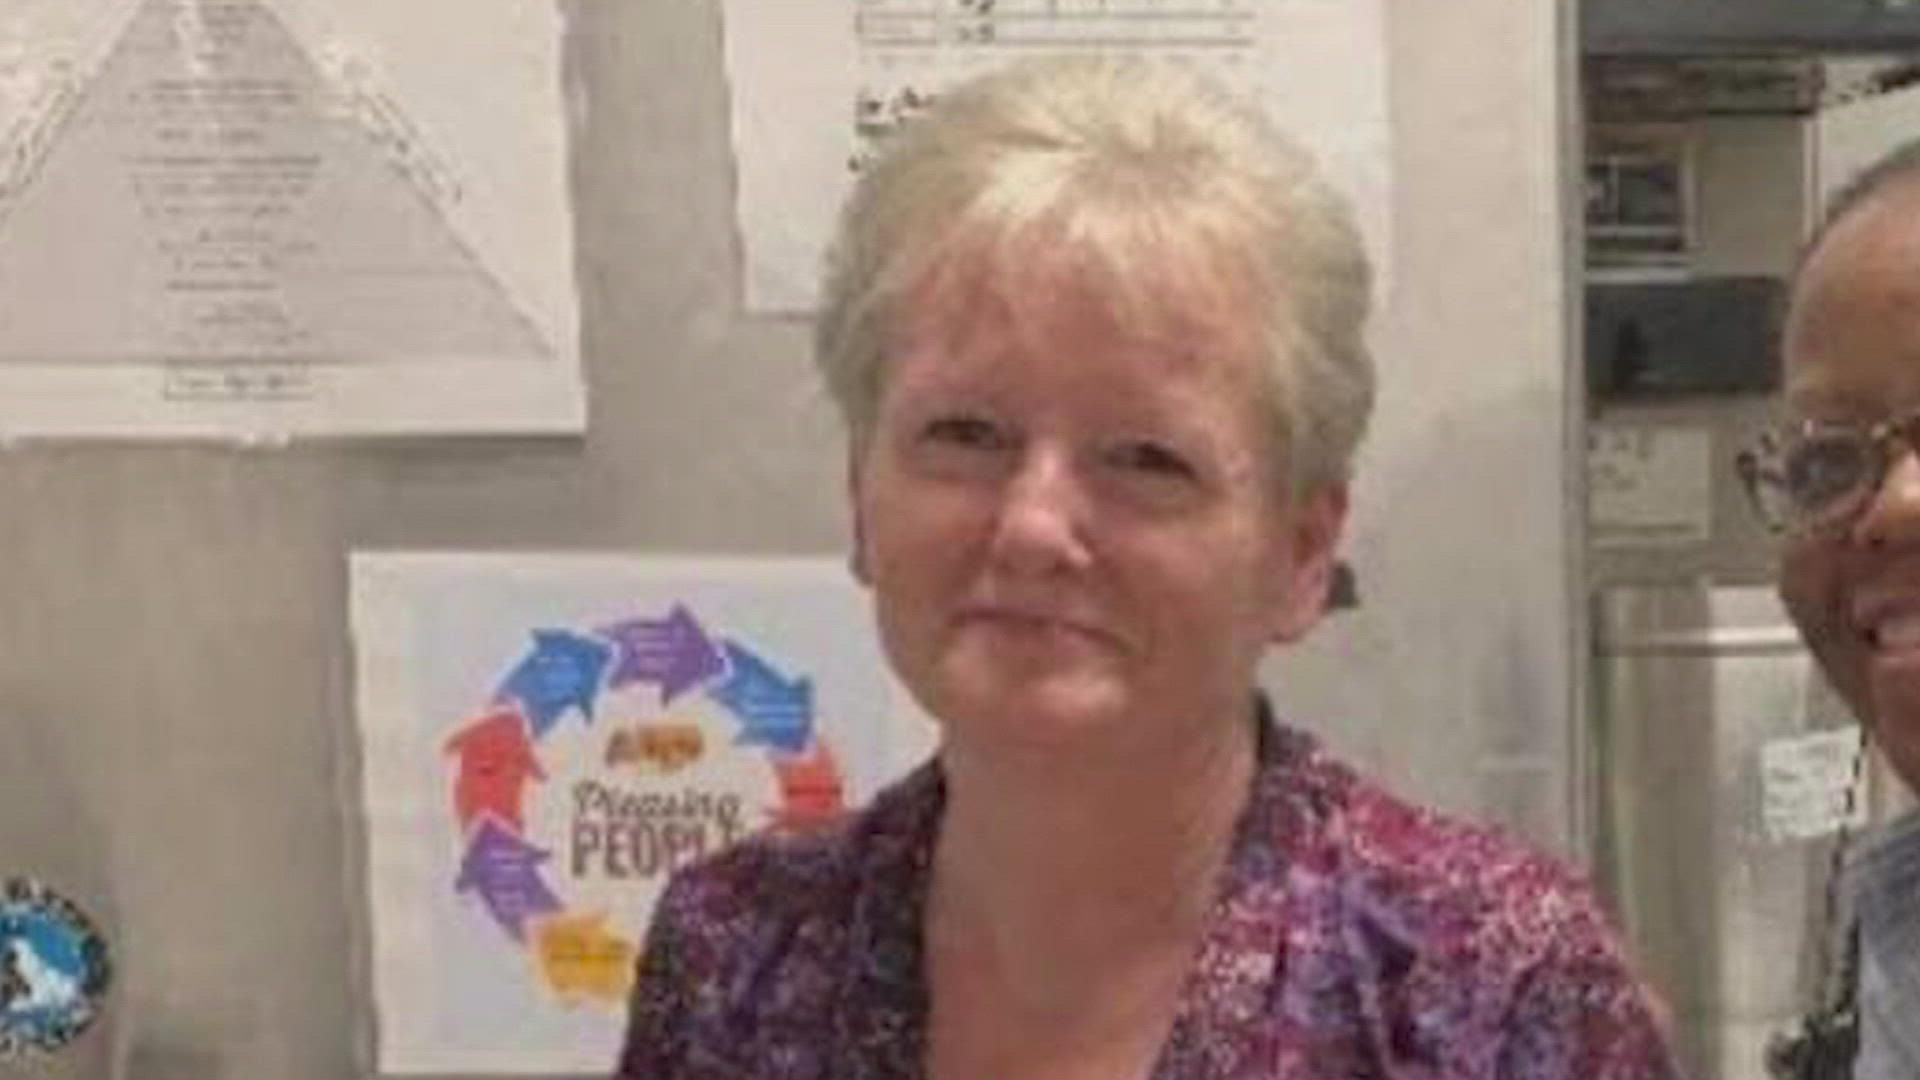 Robin Baucom, 59, was pronounced dead after stopping a man from stealing from an employee. Family, friends and customers remember her as a community pillar.